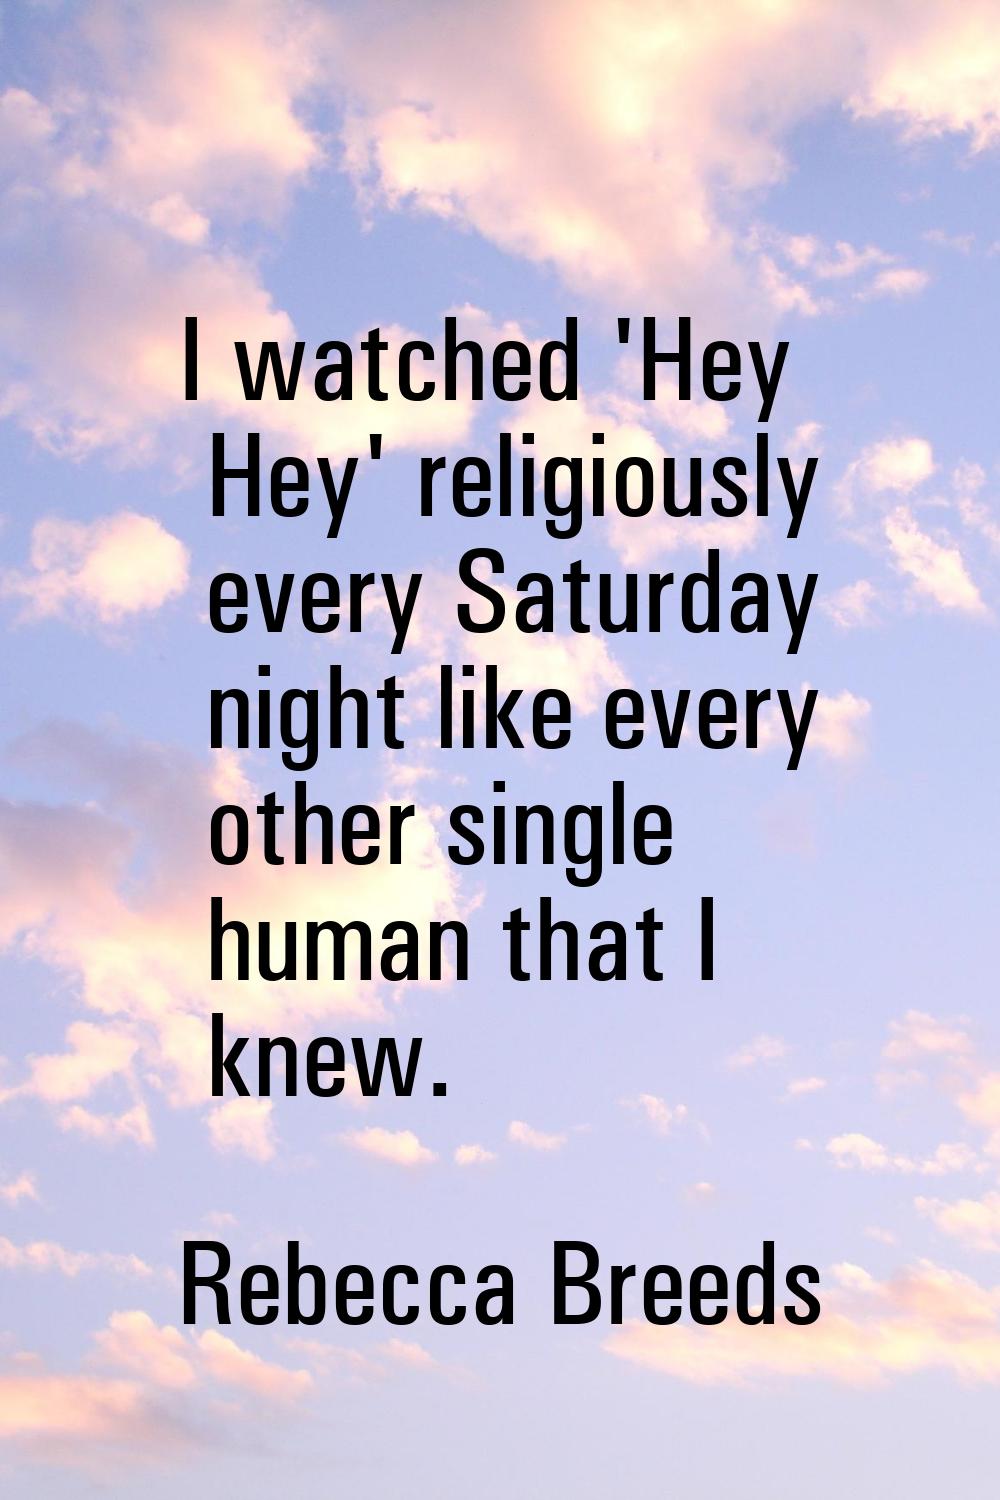 I watched 'Hey Hey' religiously every Saturday night like every other single human that I knew.